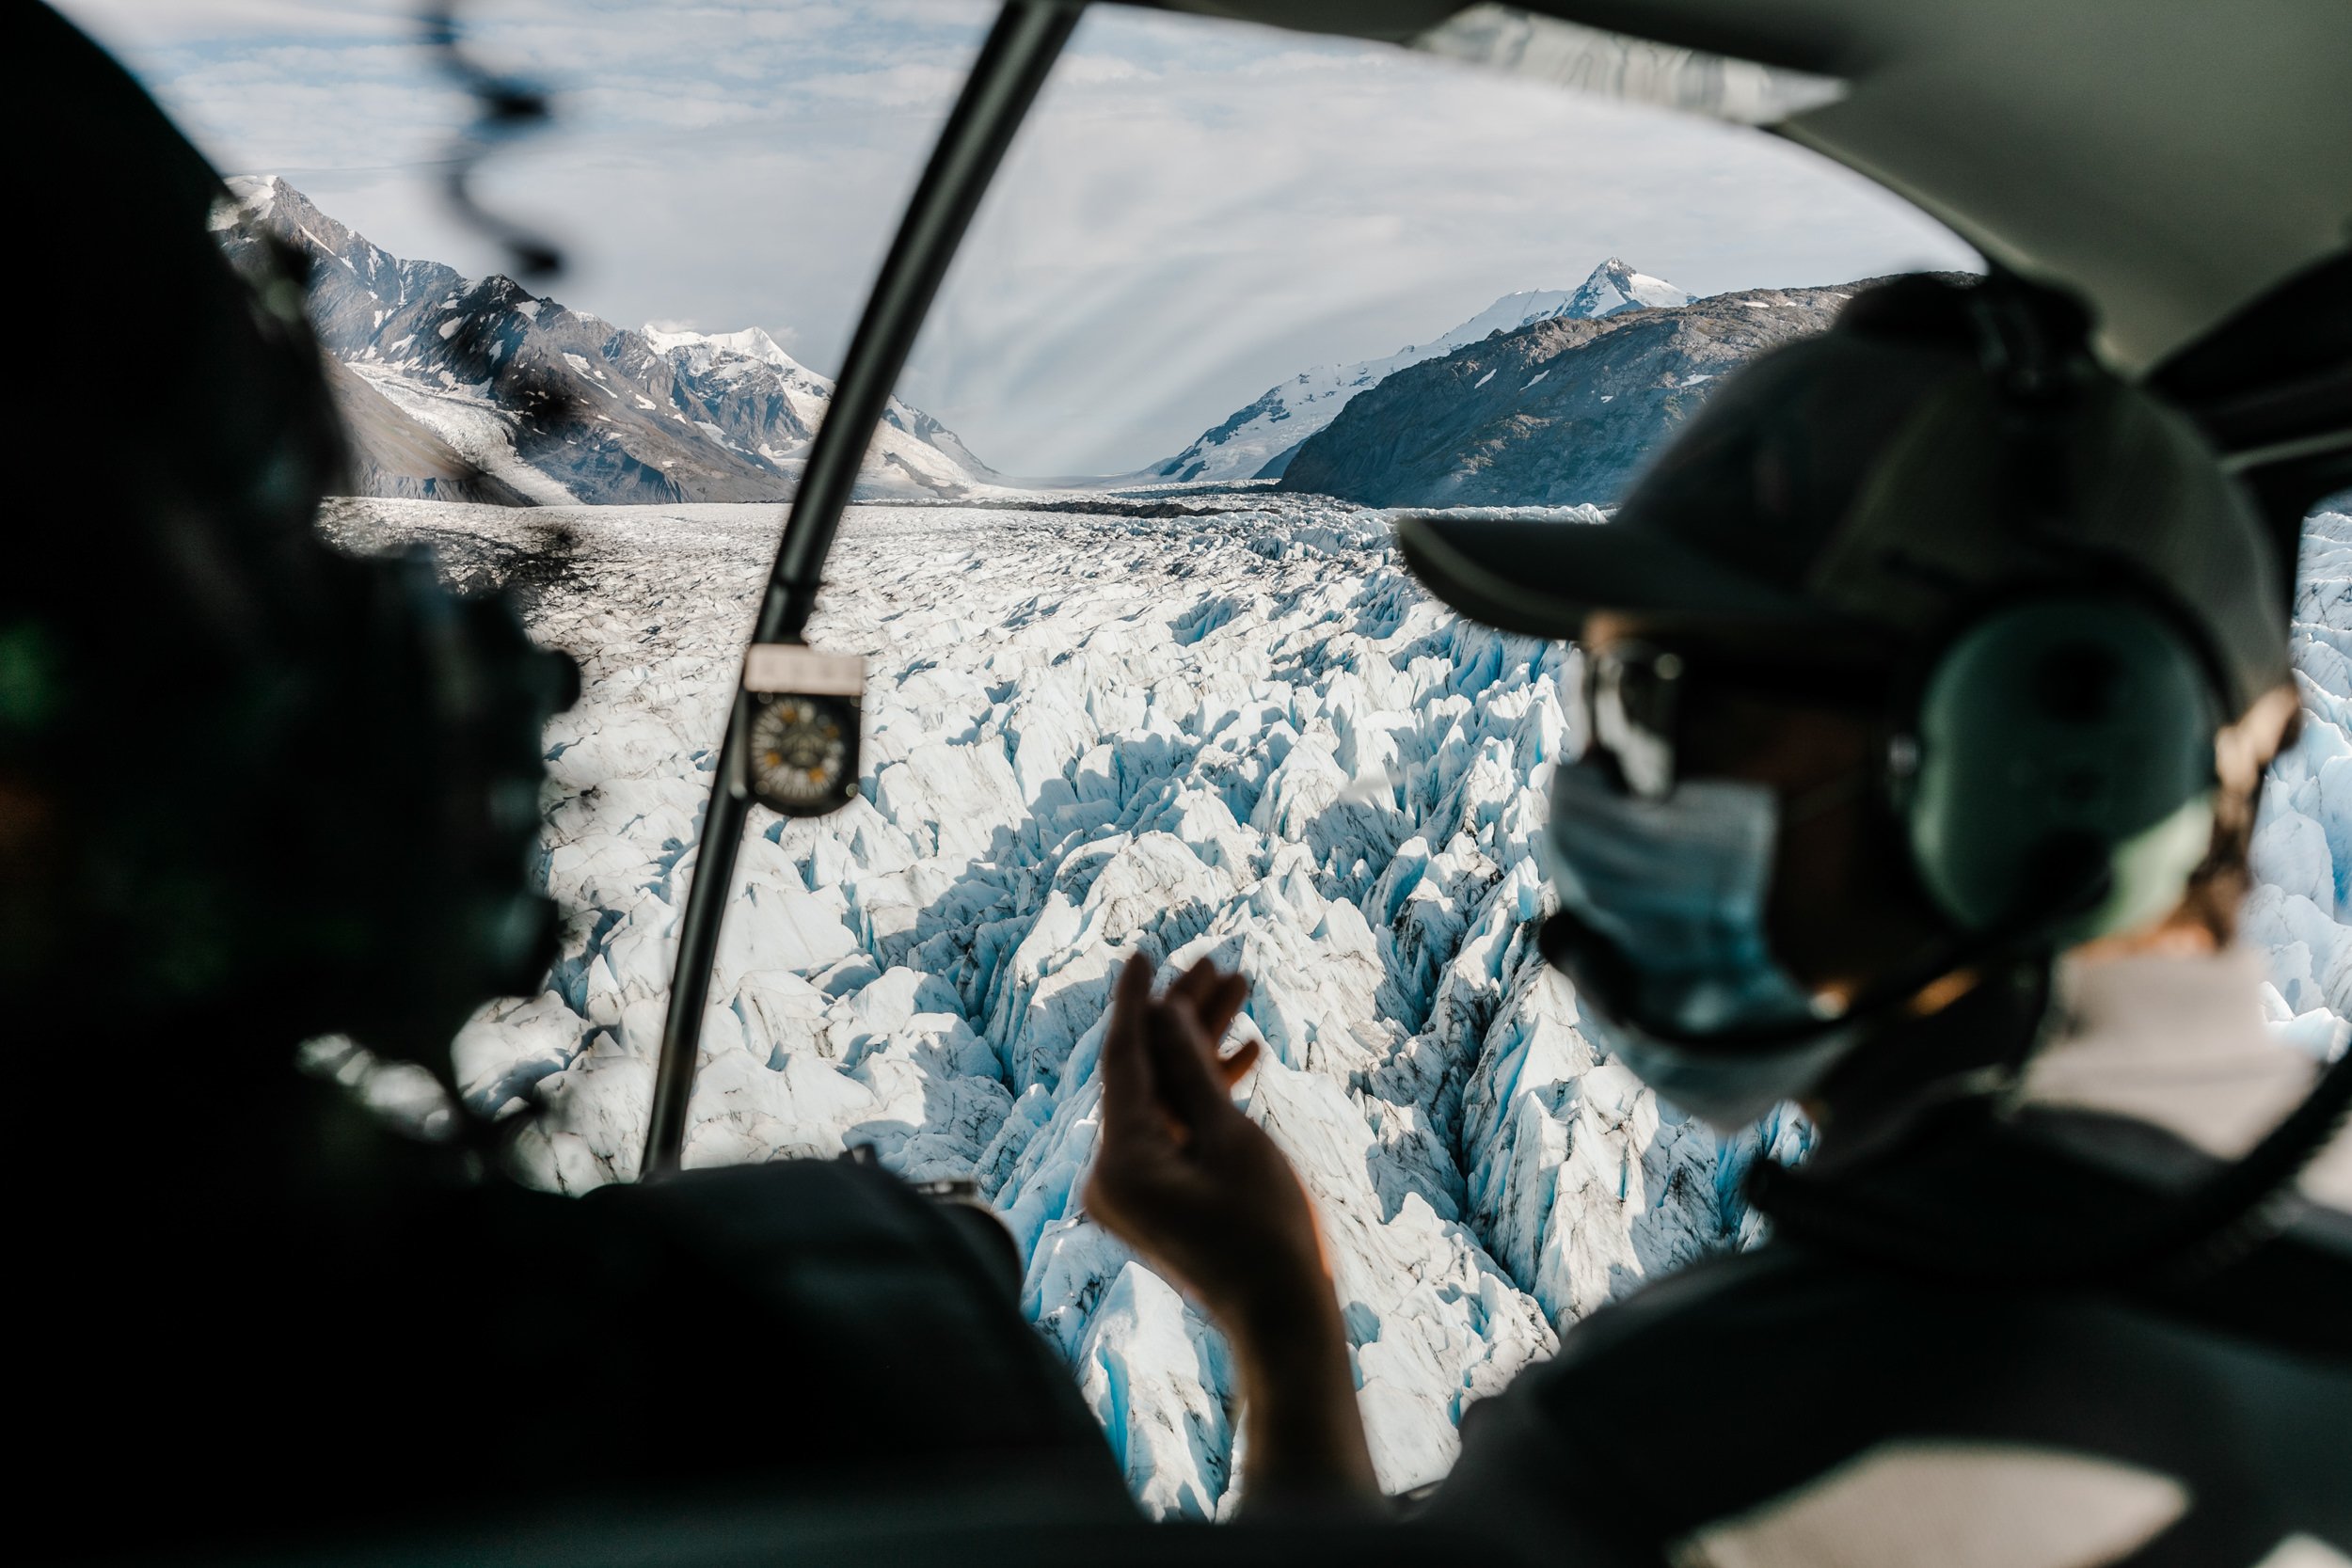 Helicopter Adventure Wedding in the Mountains in Alaska | The Hearnes Elopement Photography